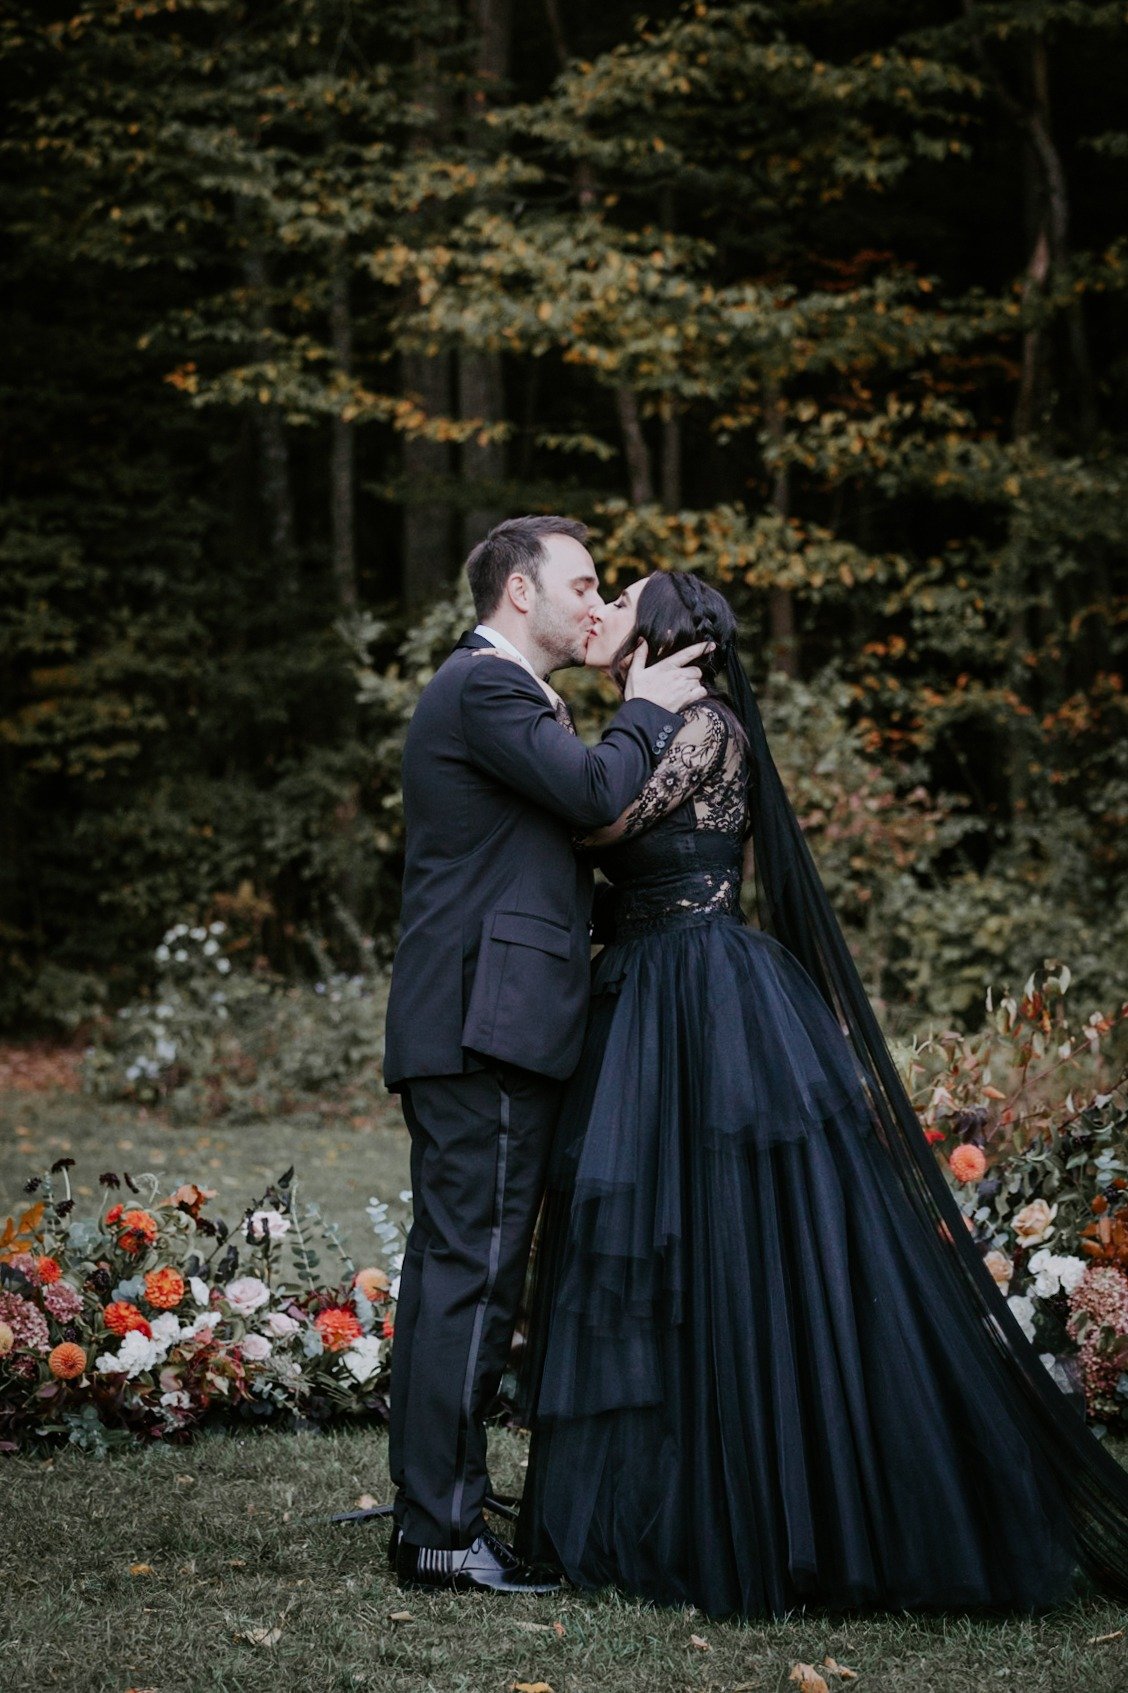 Romantic first kiss at moody goth wedding ceremony 